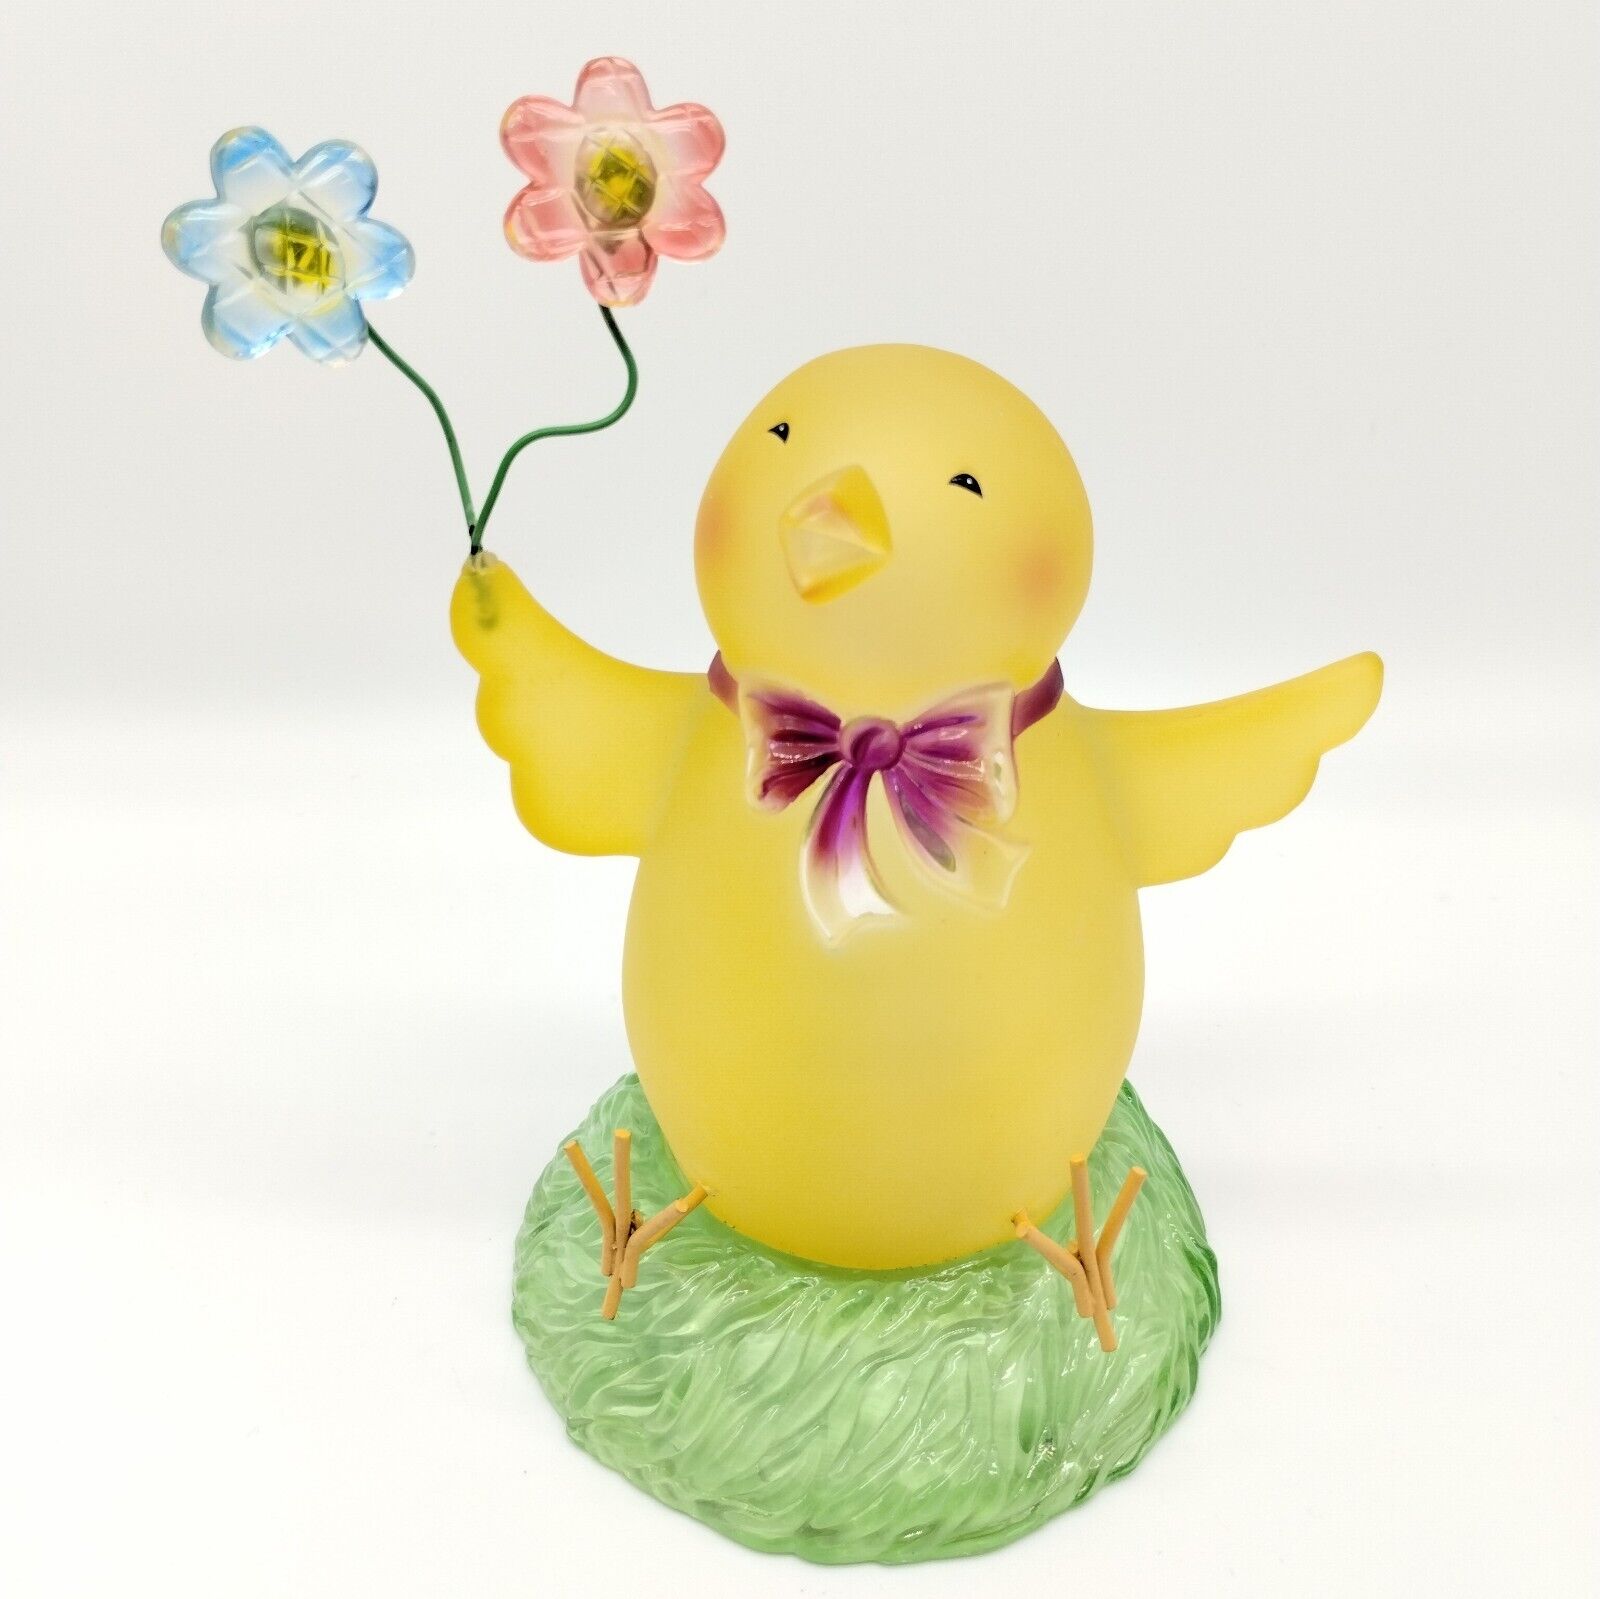 Vintage Lighted Easter Chick Figurine Holding Two Flowers Color Changing Decor